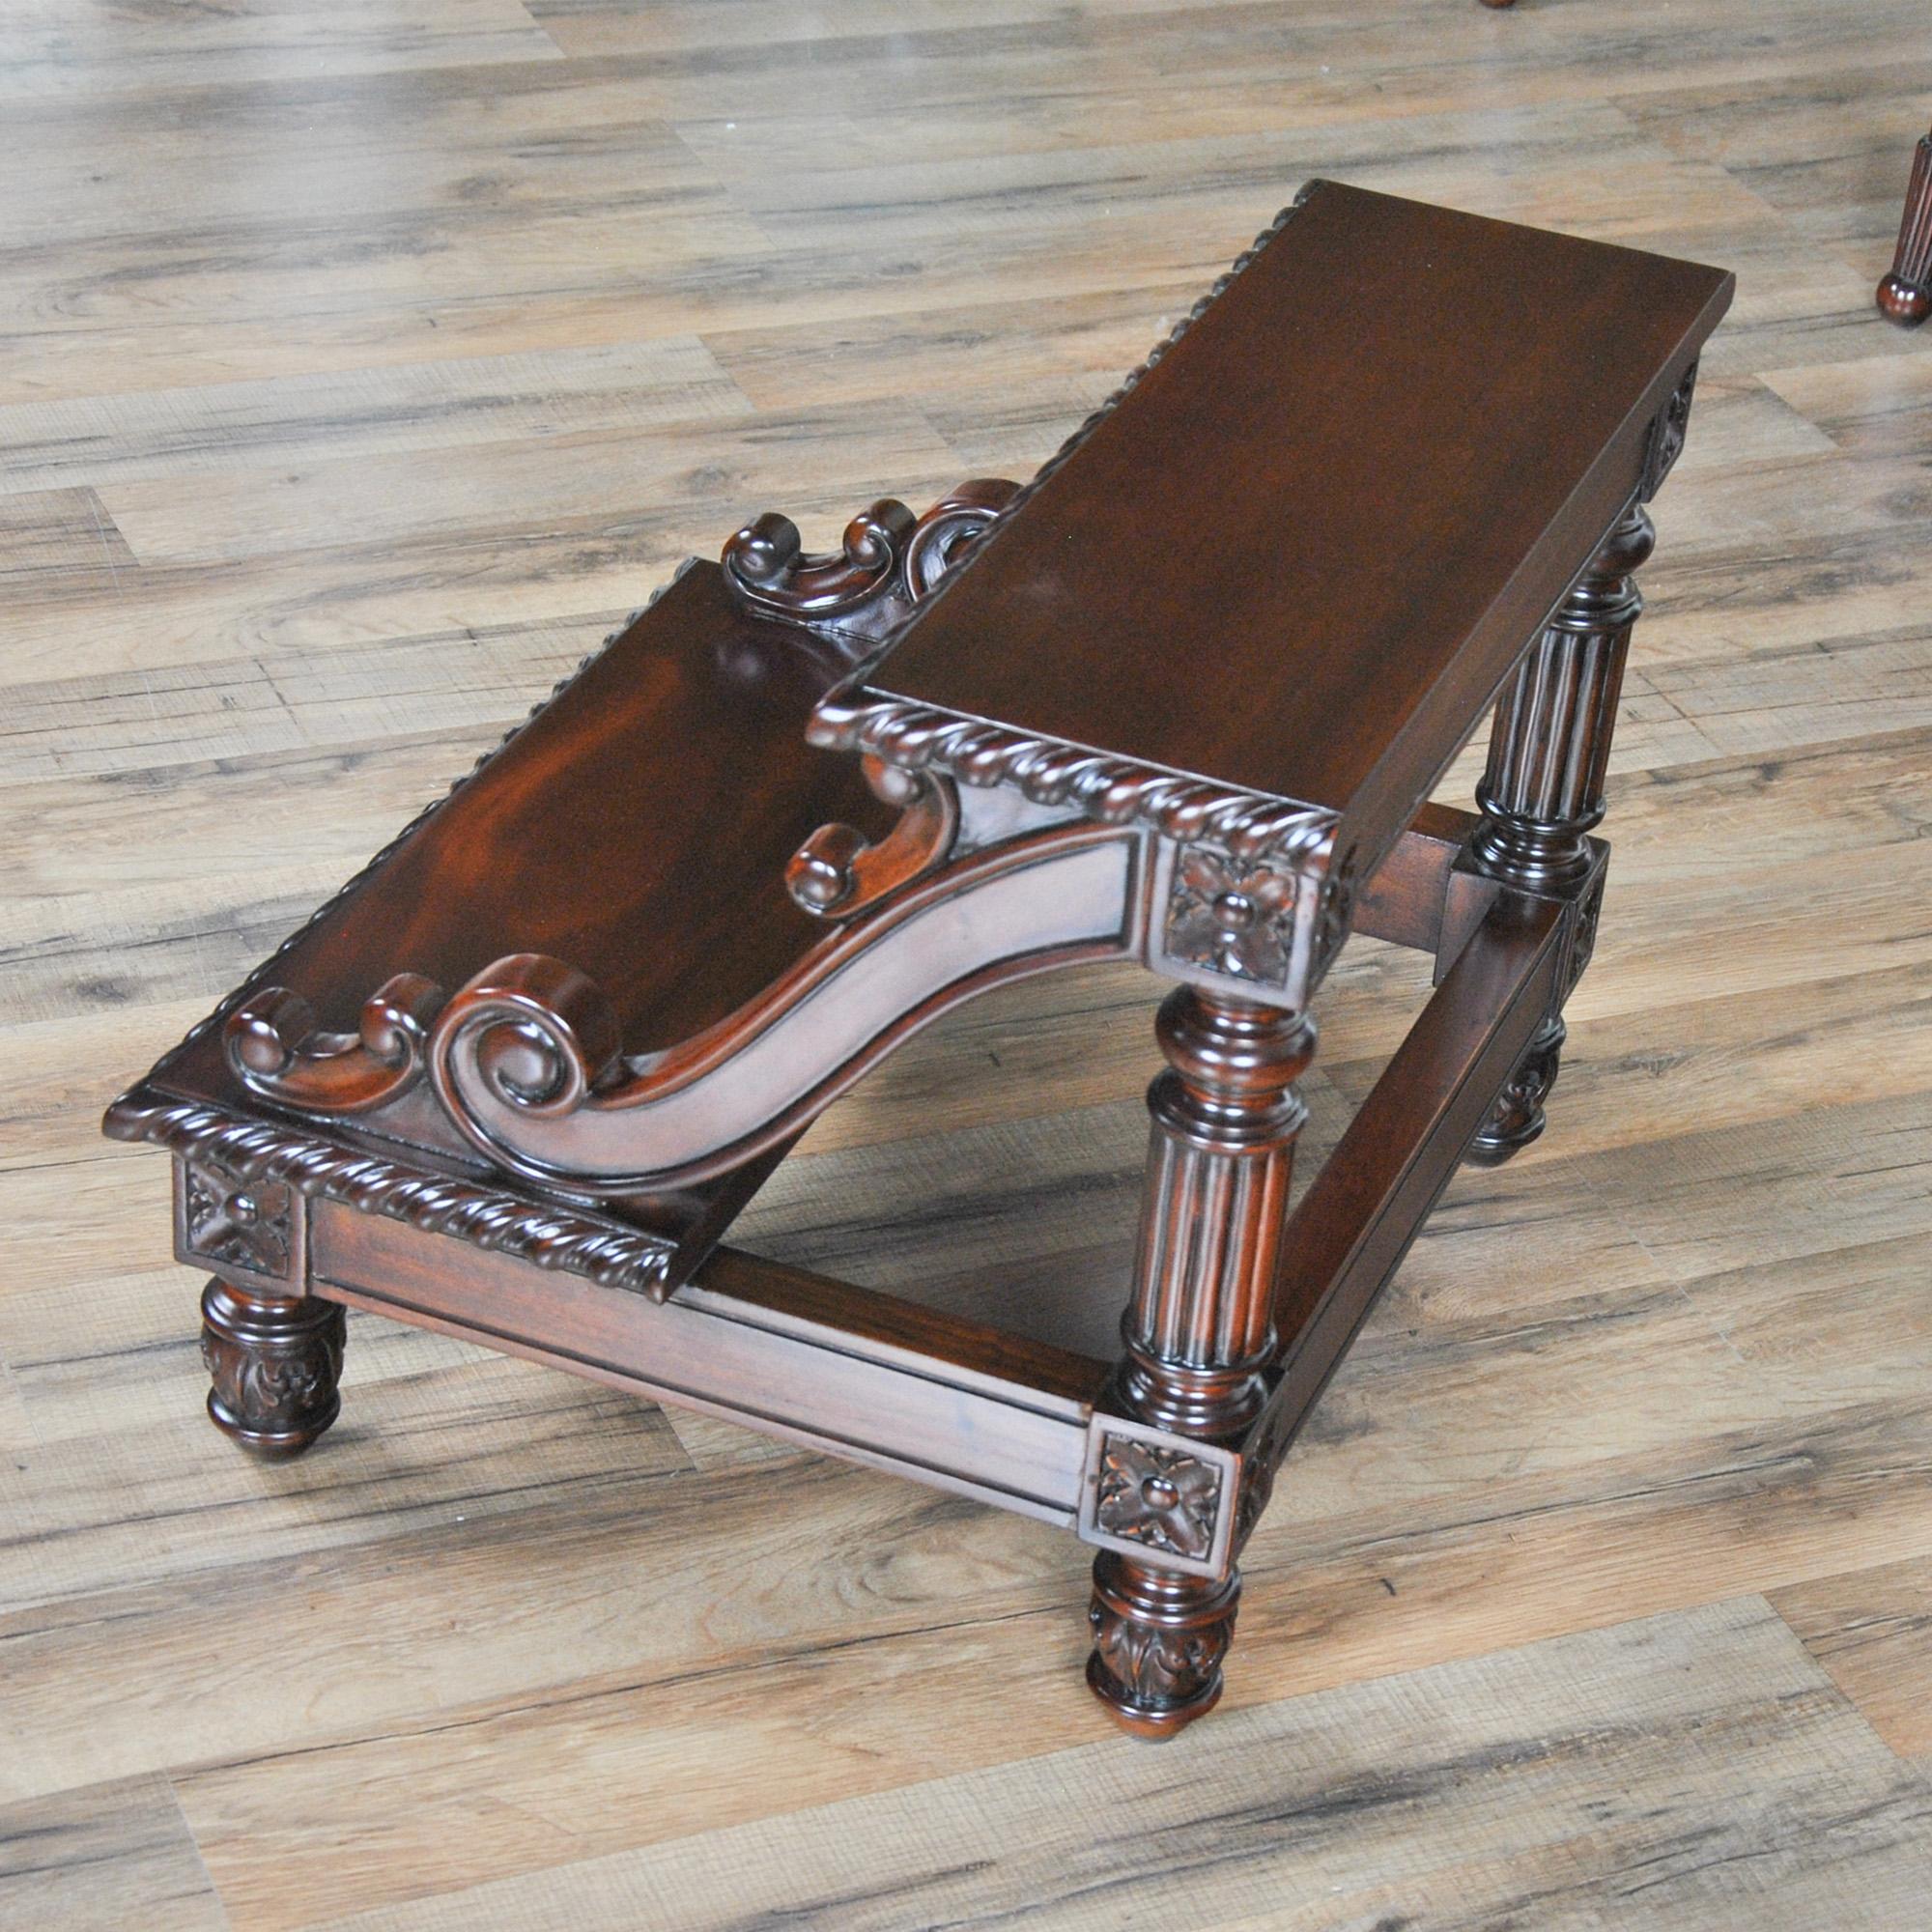 Carved Mahogany Bed Step In New Condition For Sale In Annville, PA